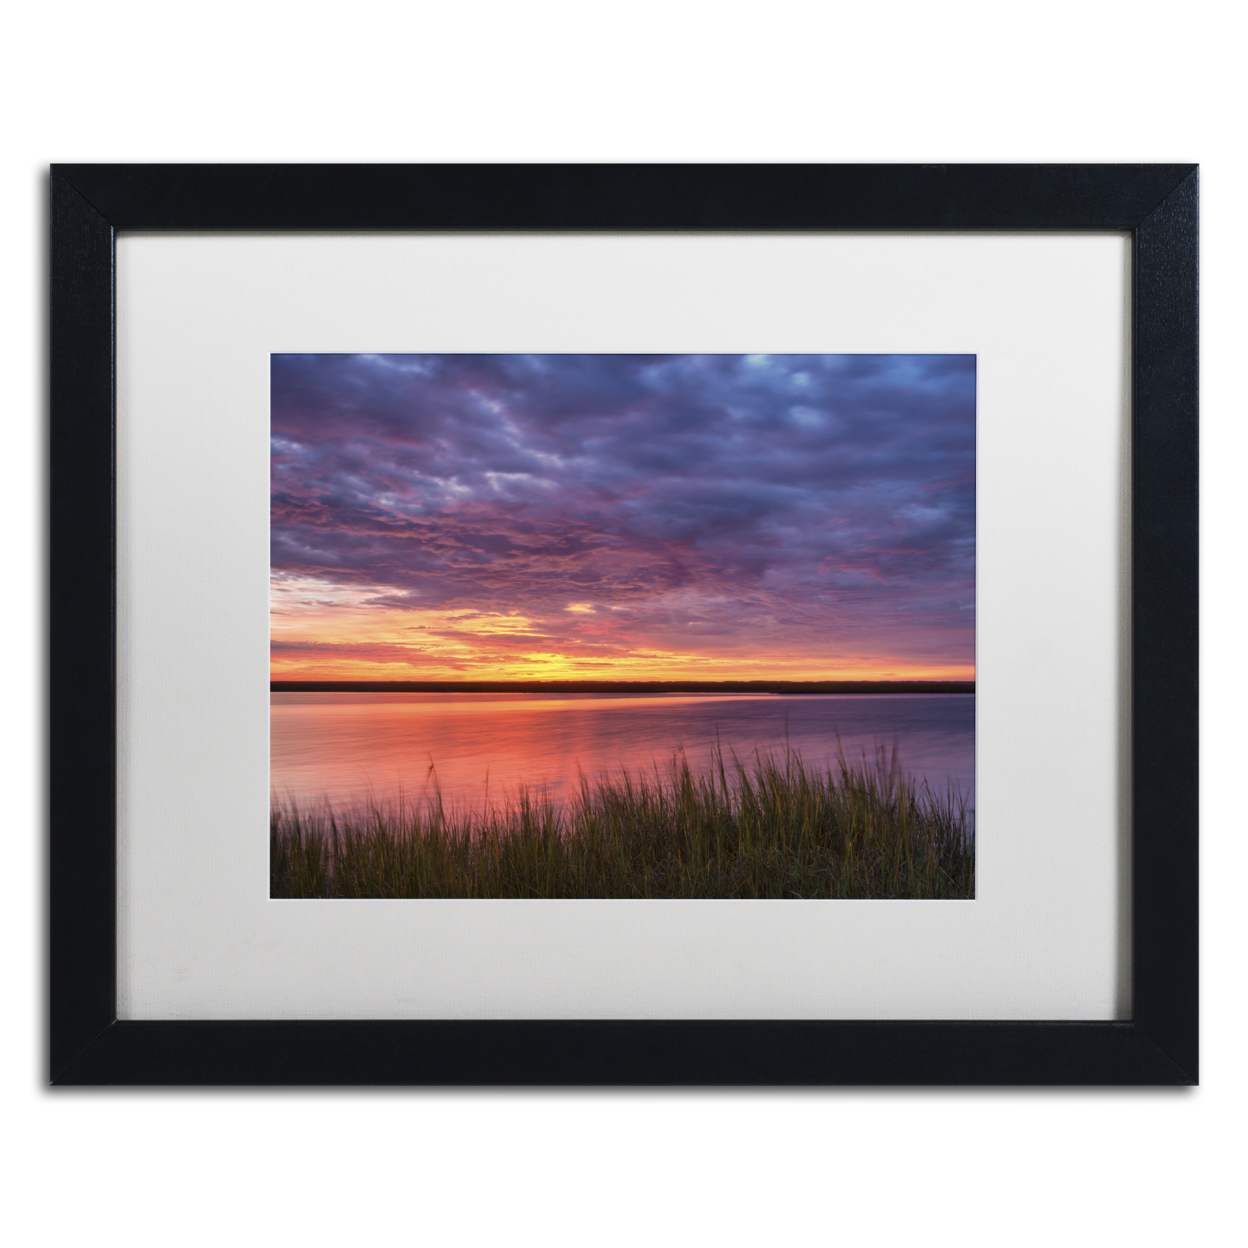 Michael Blanchette Photography 'Drama At The Marsh' Black Wooden Framed Art 18 X 22 Inches